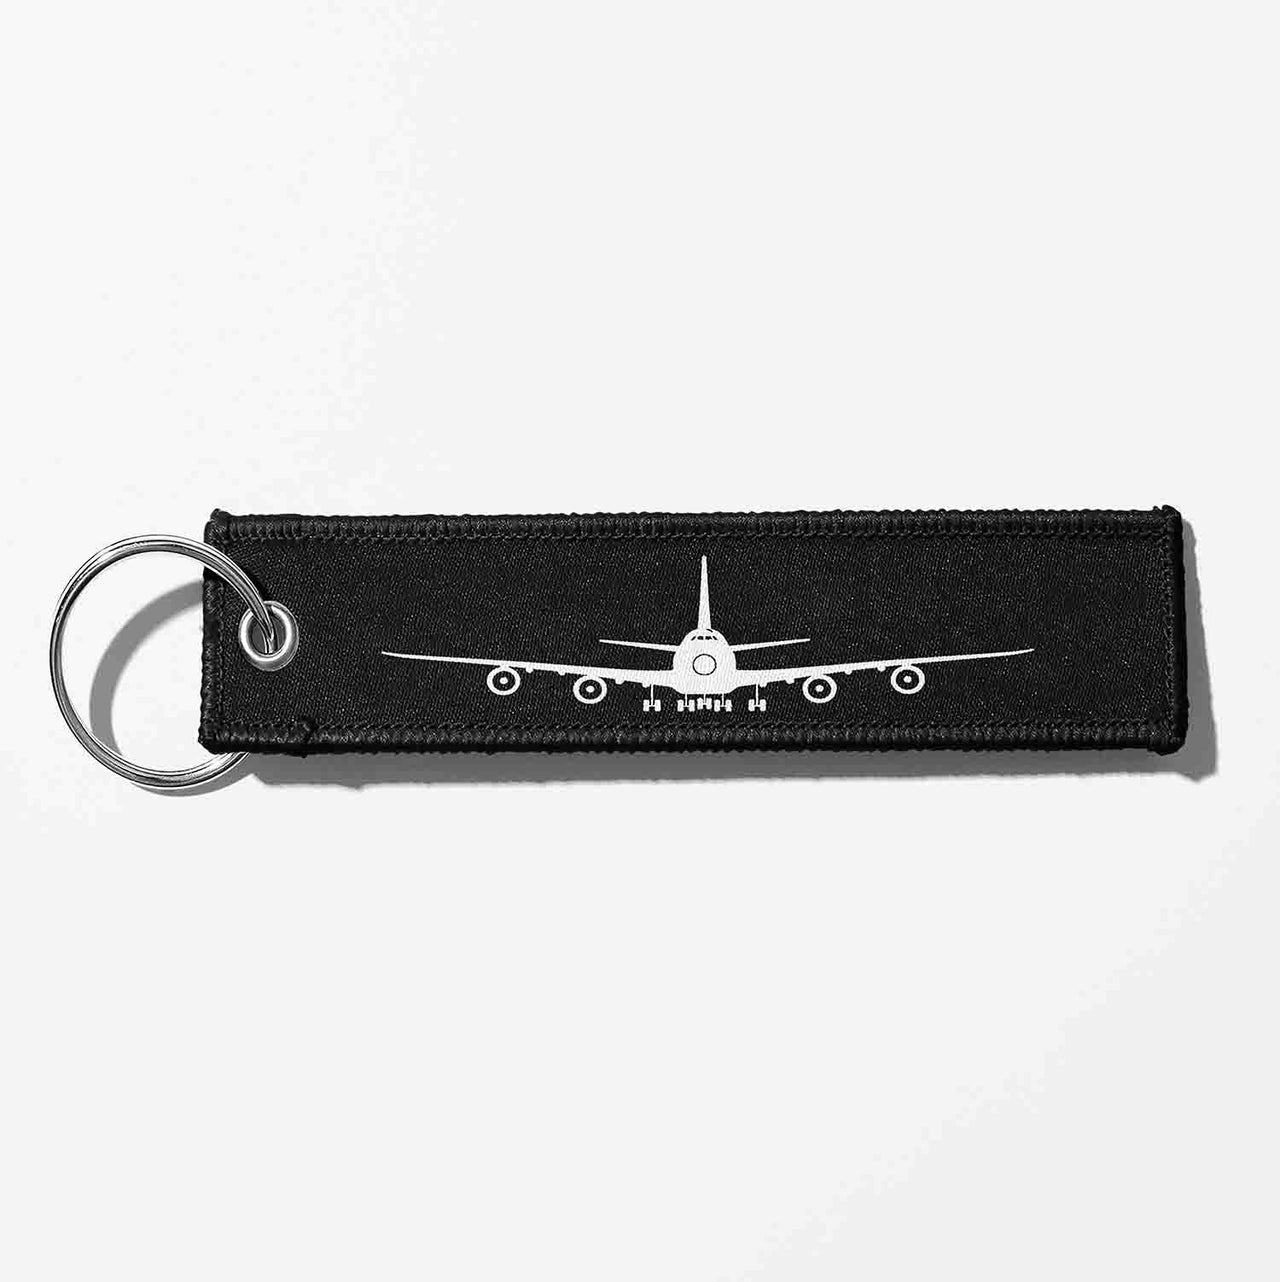 Boeing 747 Silhouette Designed Key Chains